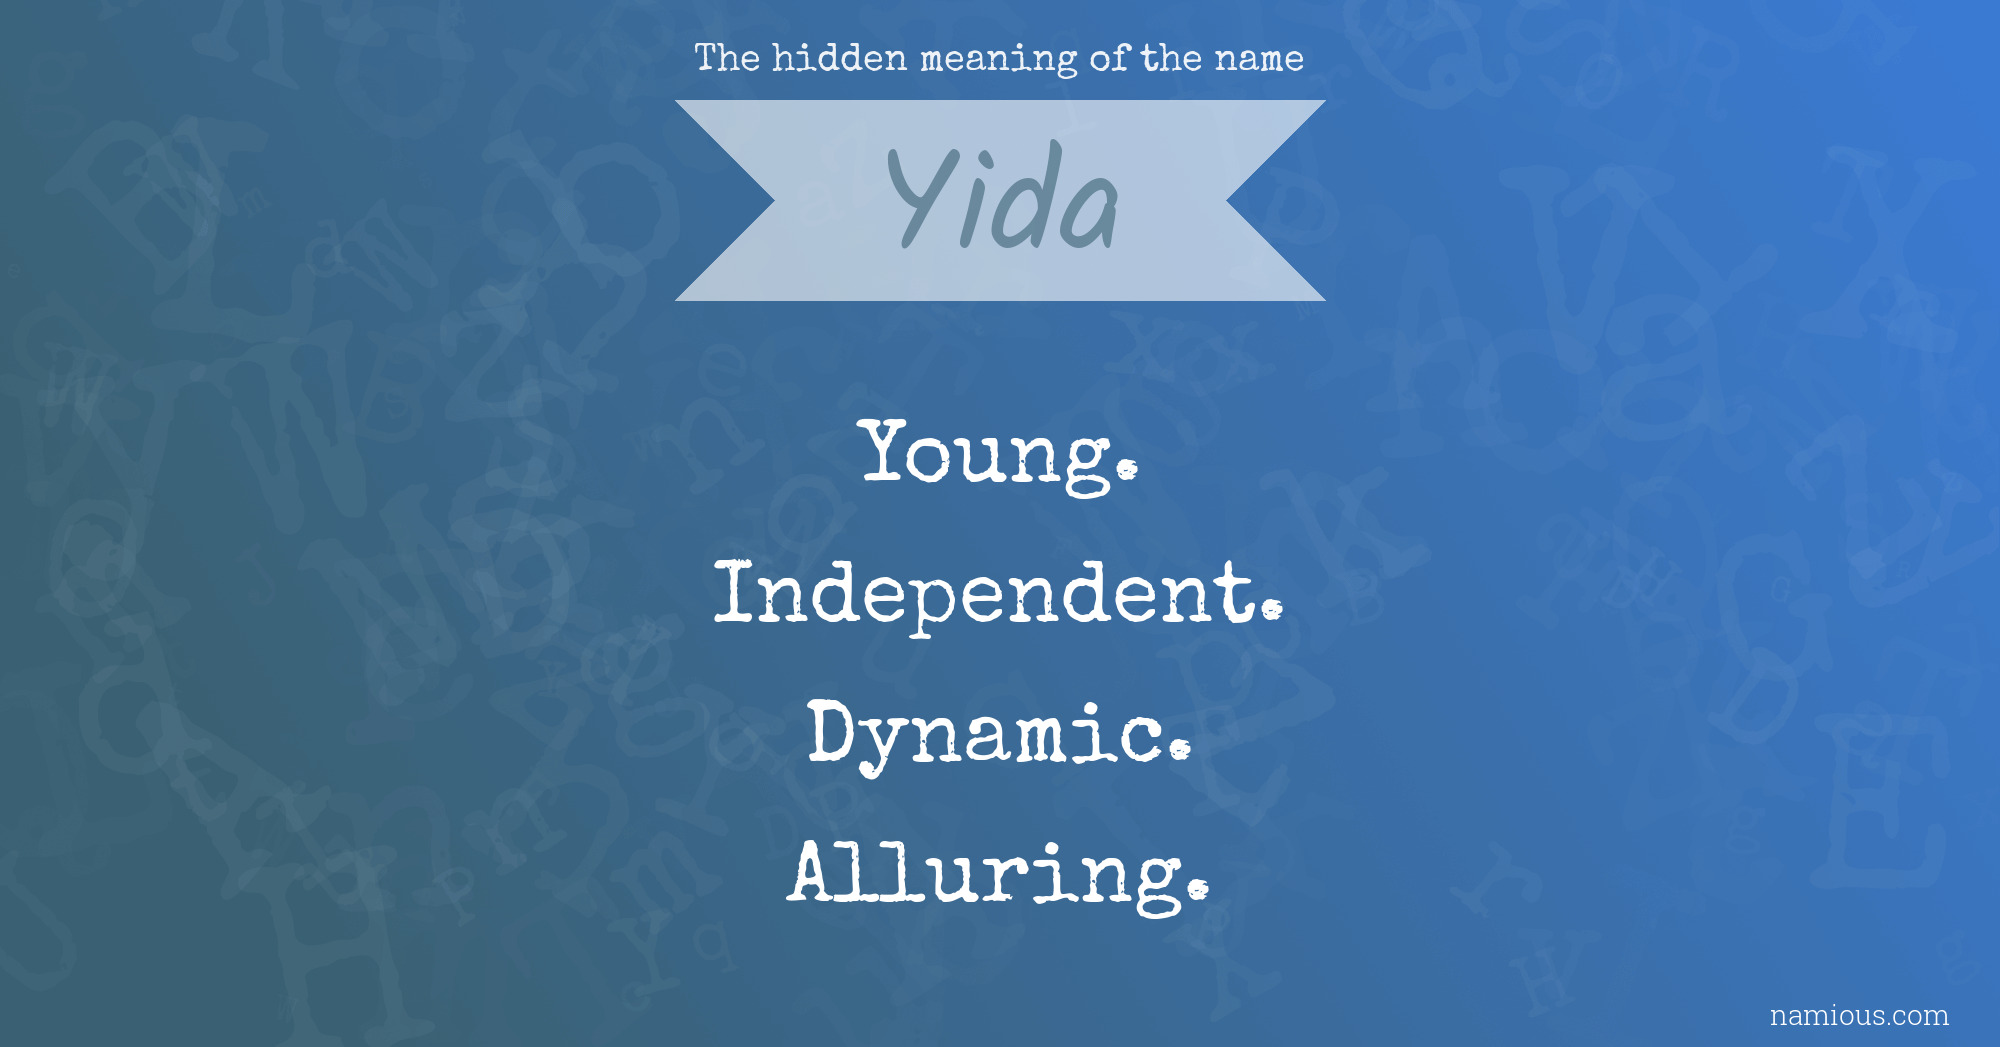 The hidden meaning of the name Yida